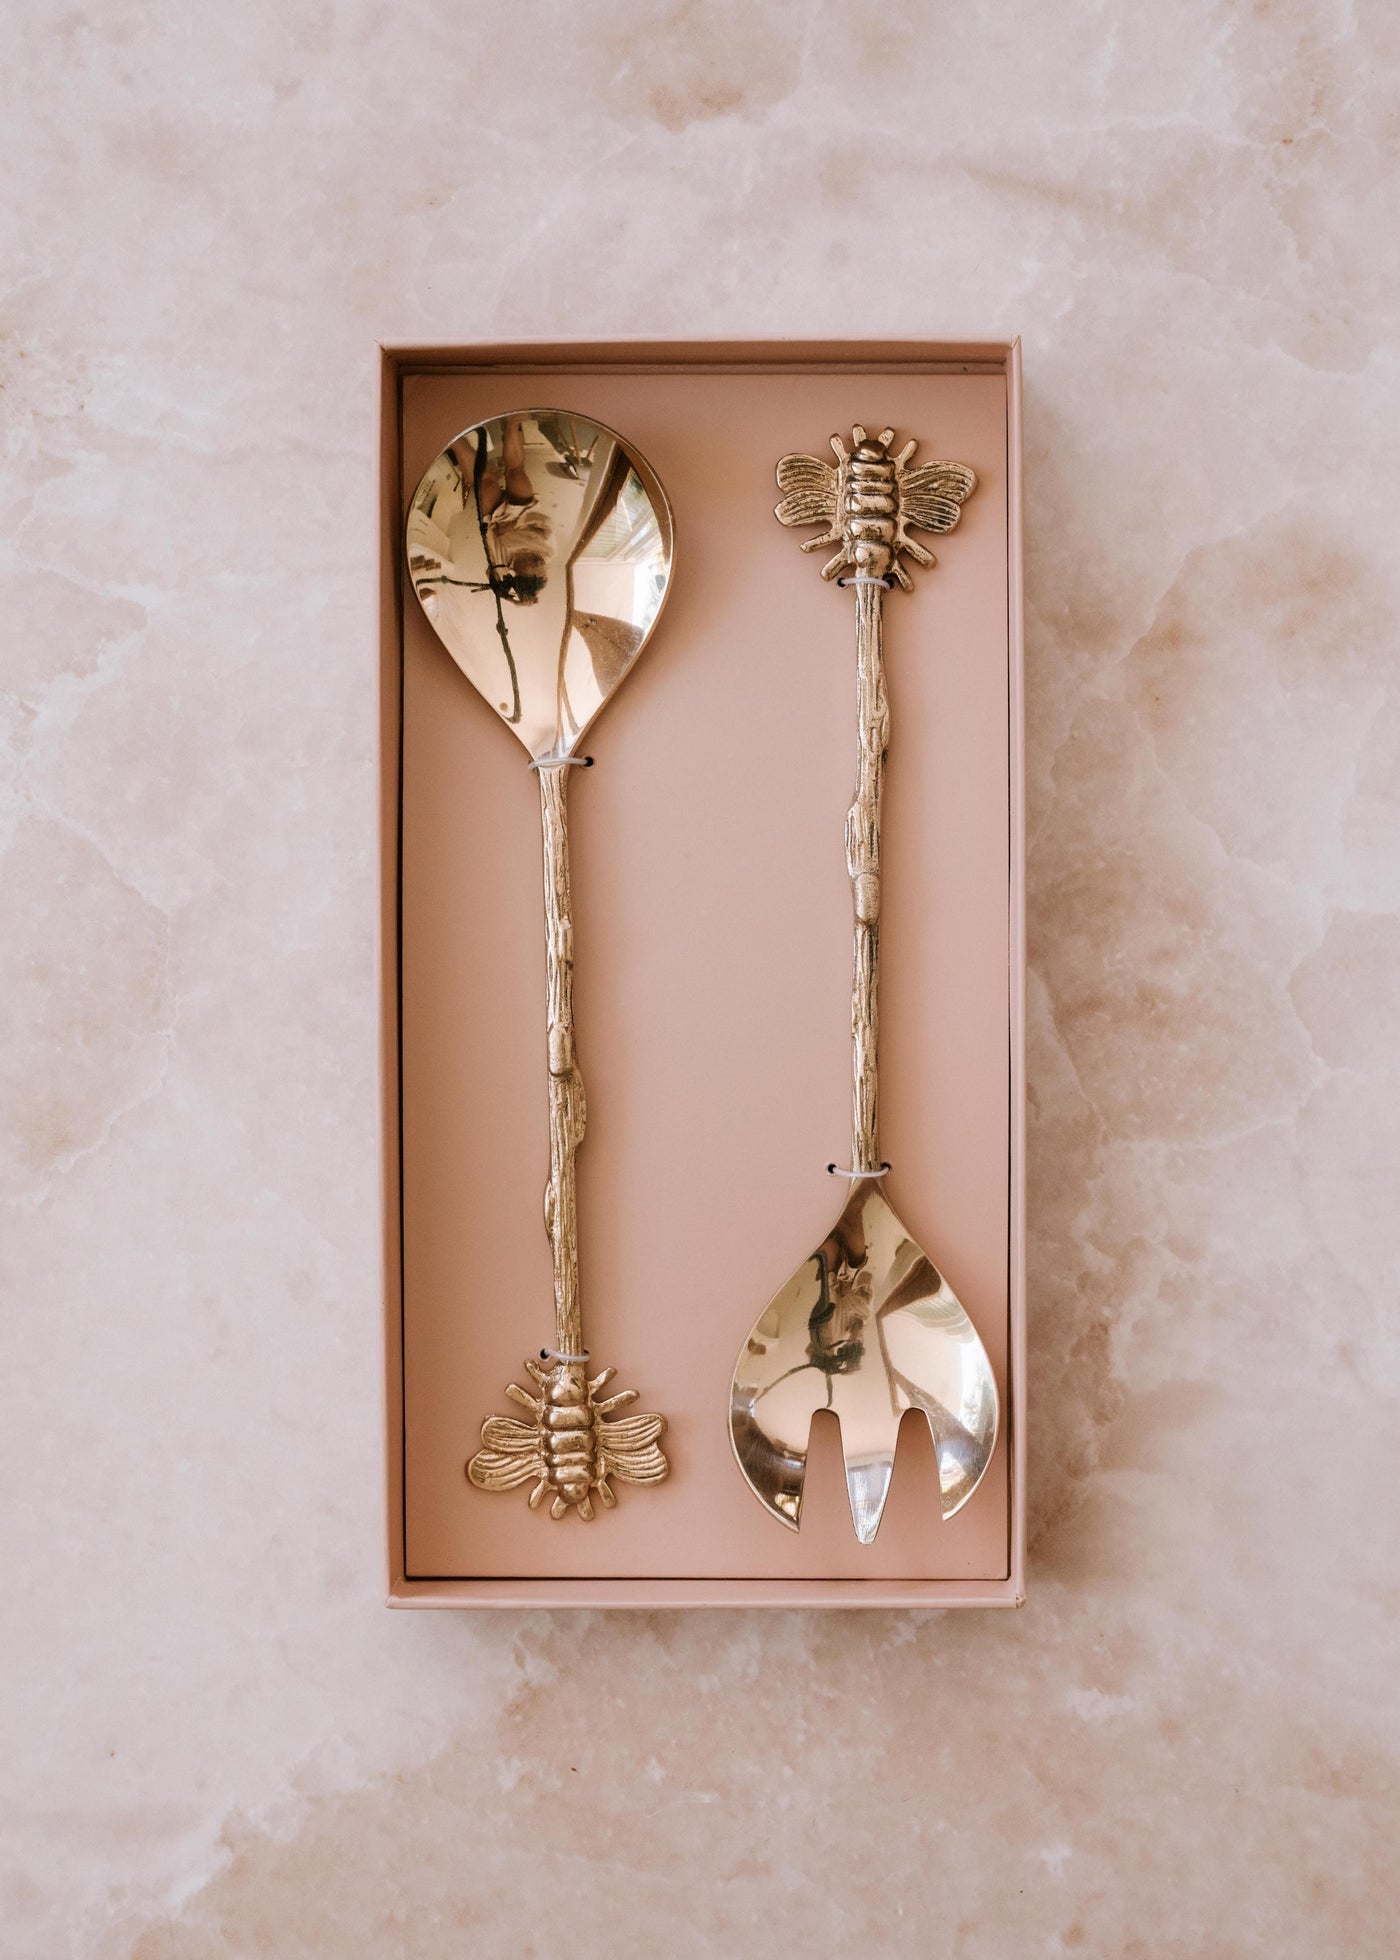 Salad Servers | The Wholesome Store